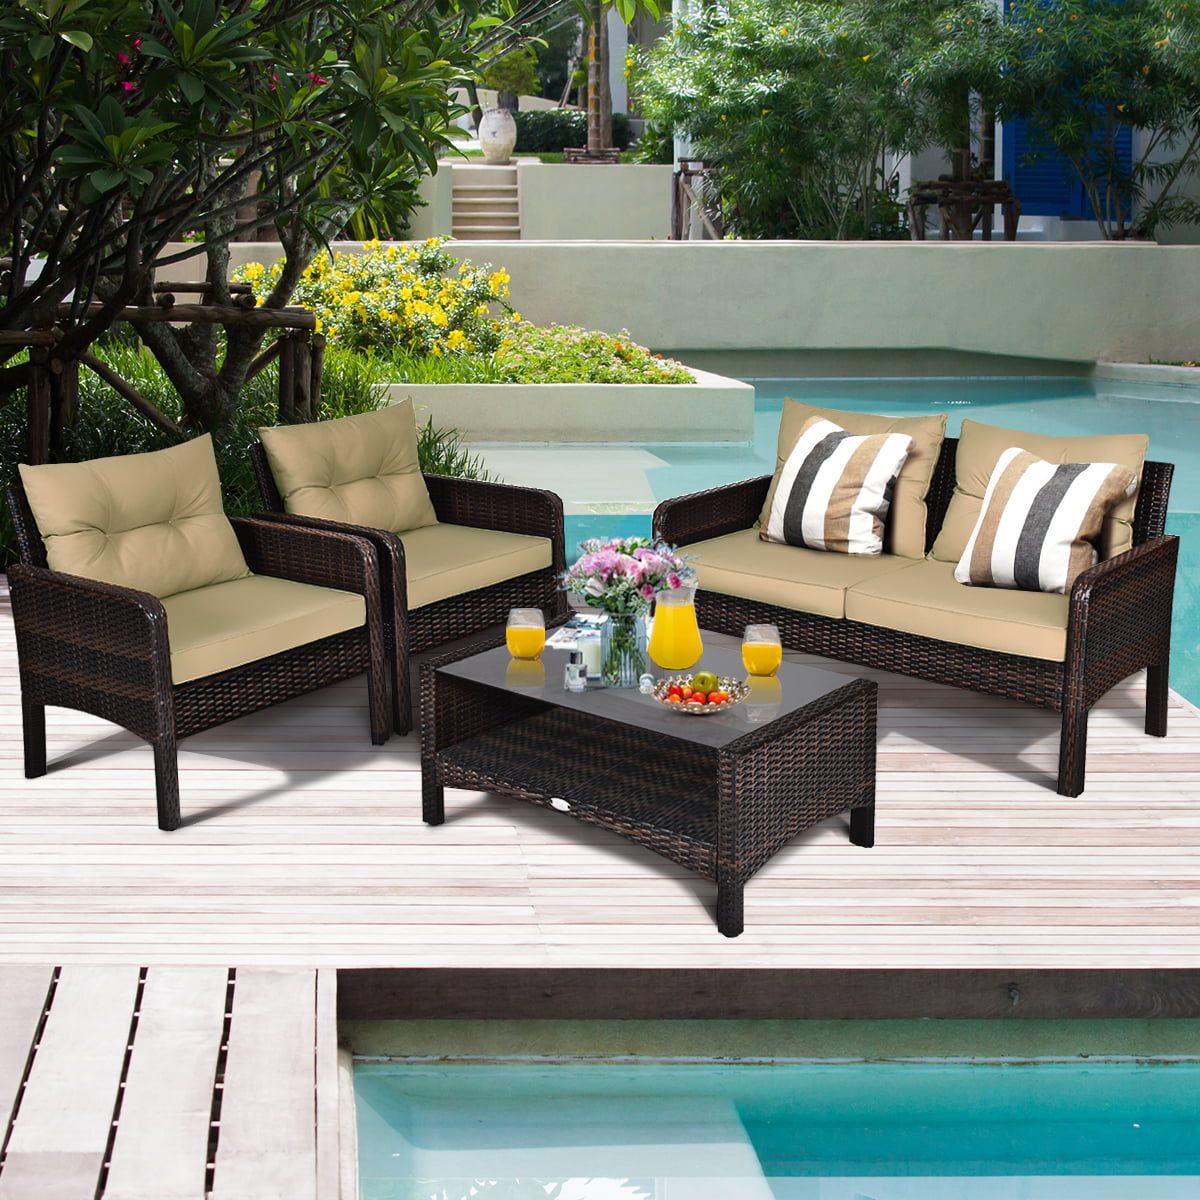 Costway 4pcs Patio Rattan Furniture Set Loveseat Sofa Coffee Table Throughout 4pcs Rattan Patio Coffee Tables (View 7 of 15)